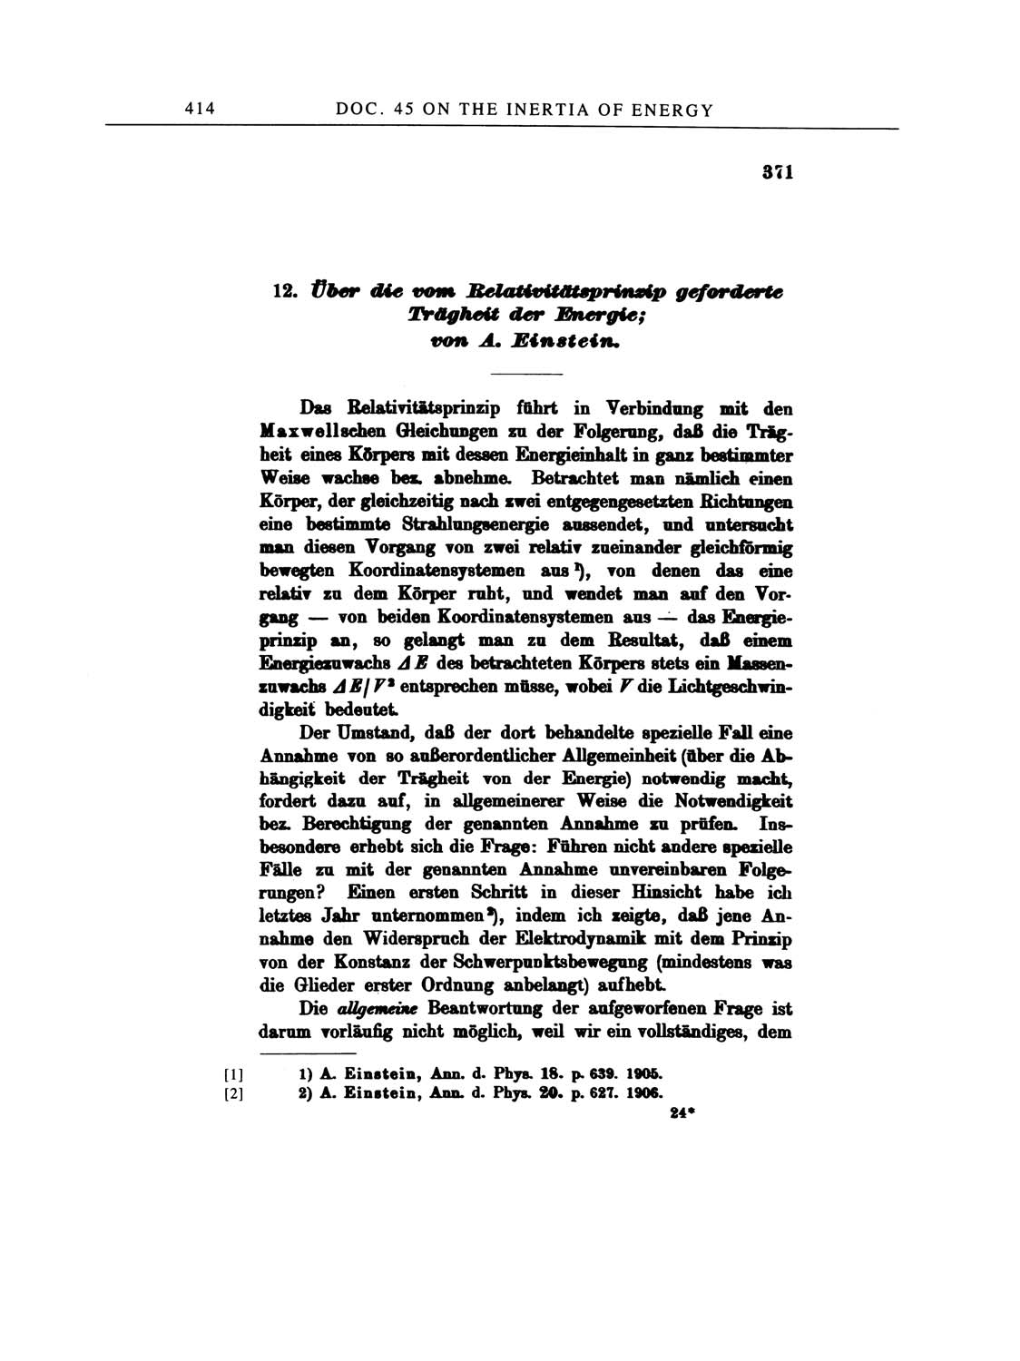 Volume 2: The Swiss Years: Writings, 1900-1909 page 414